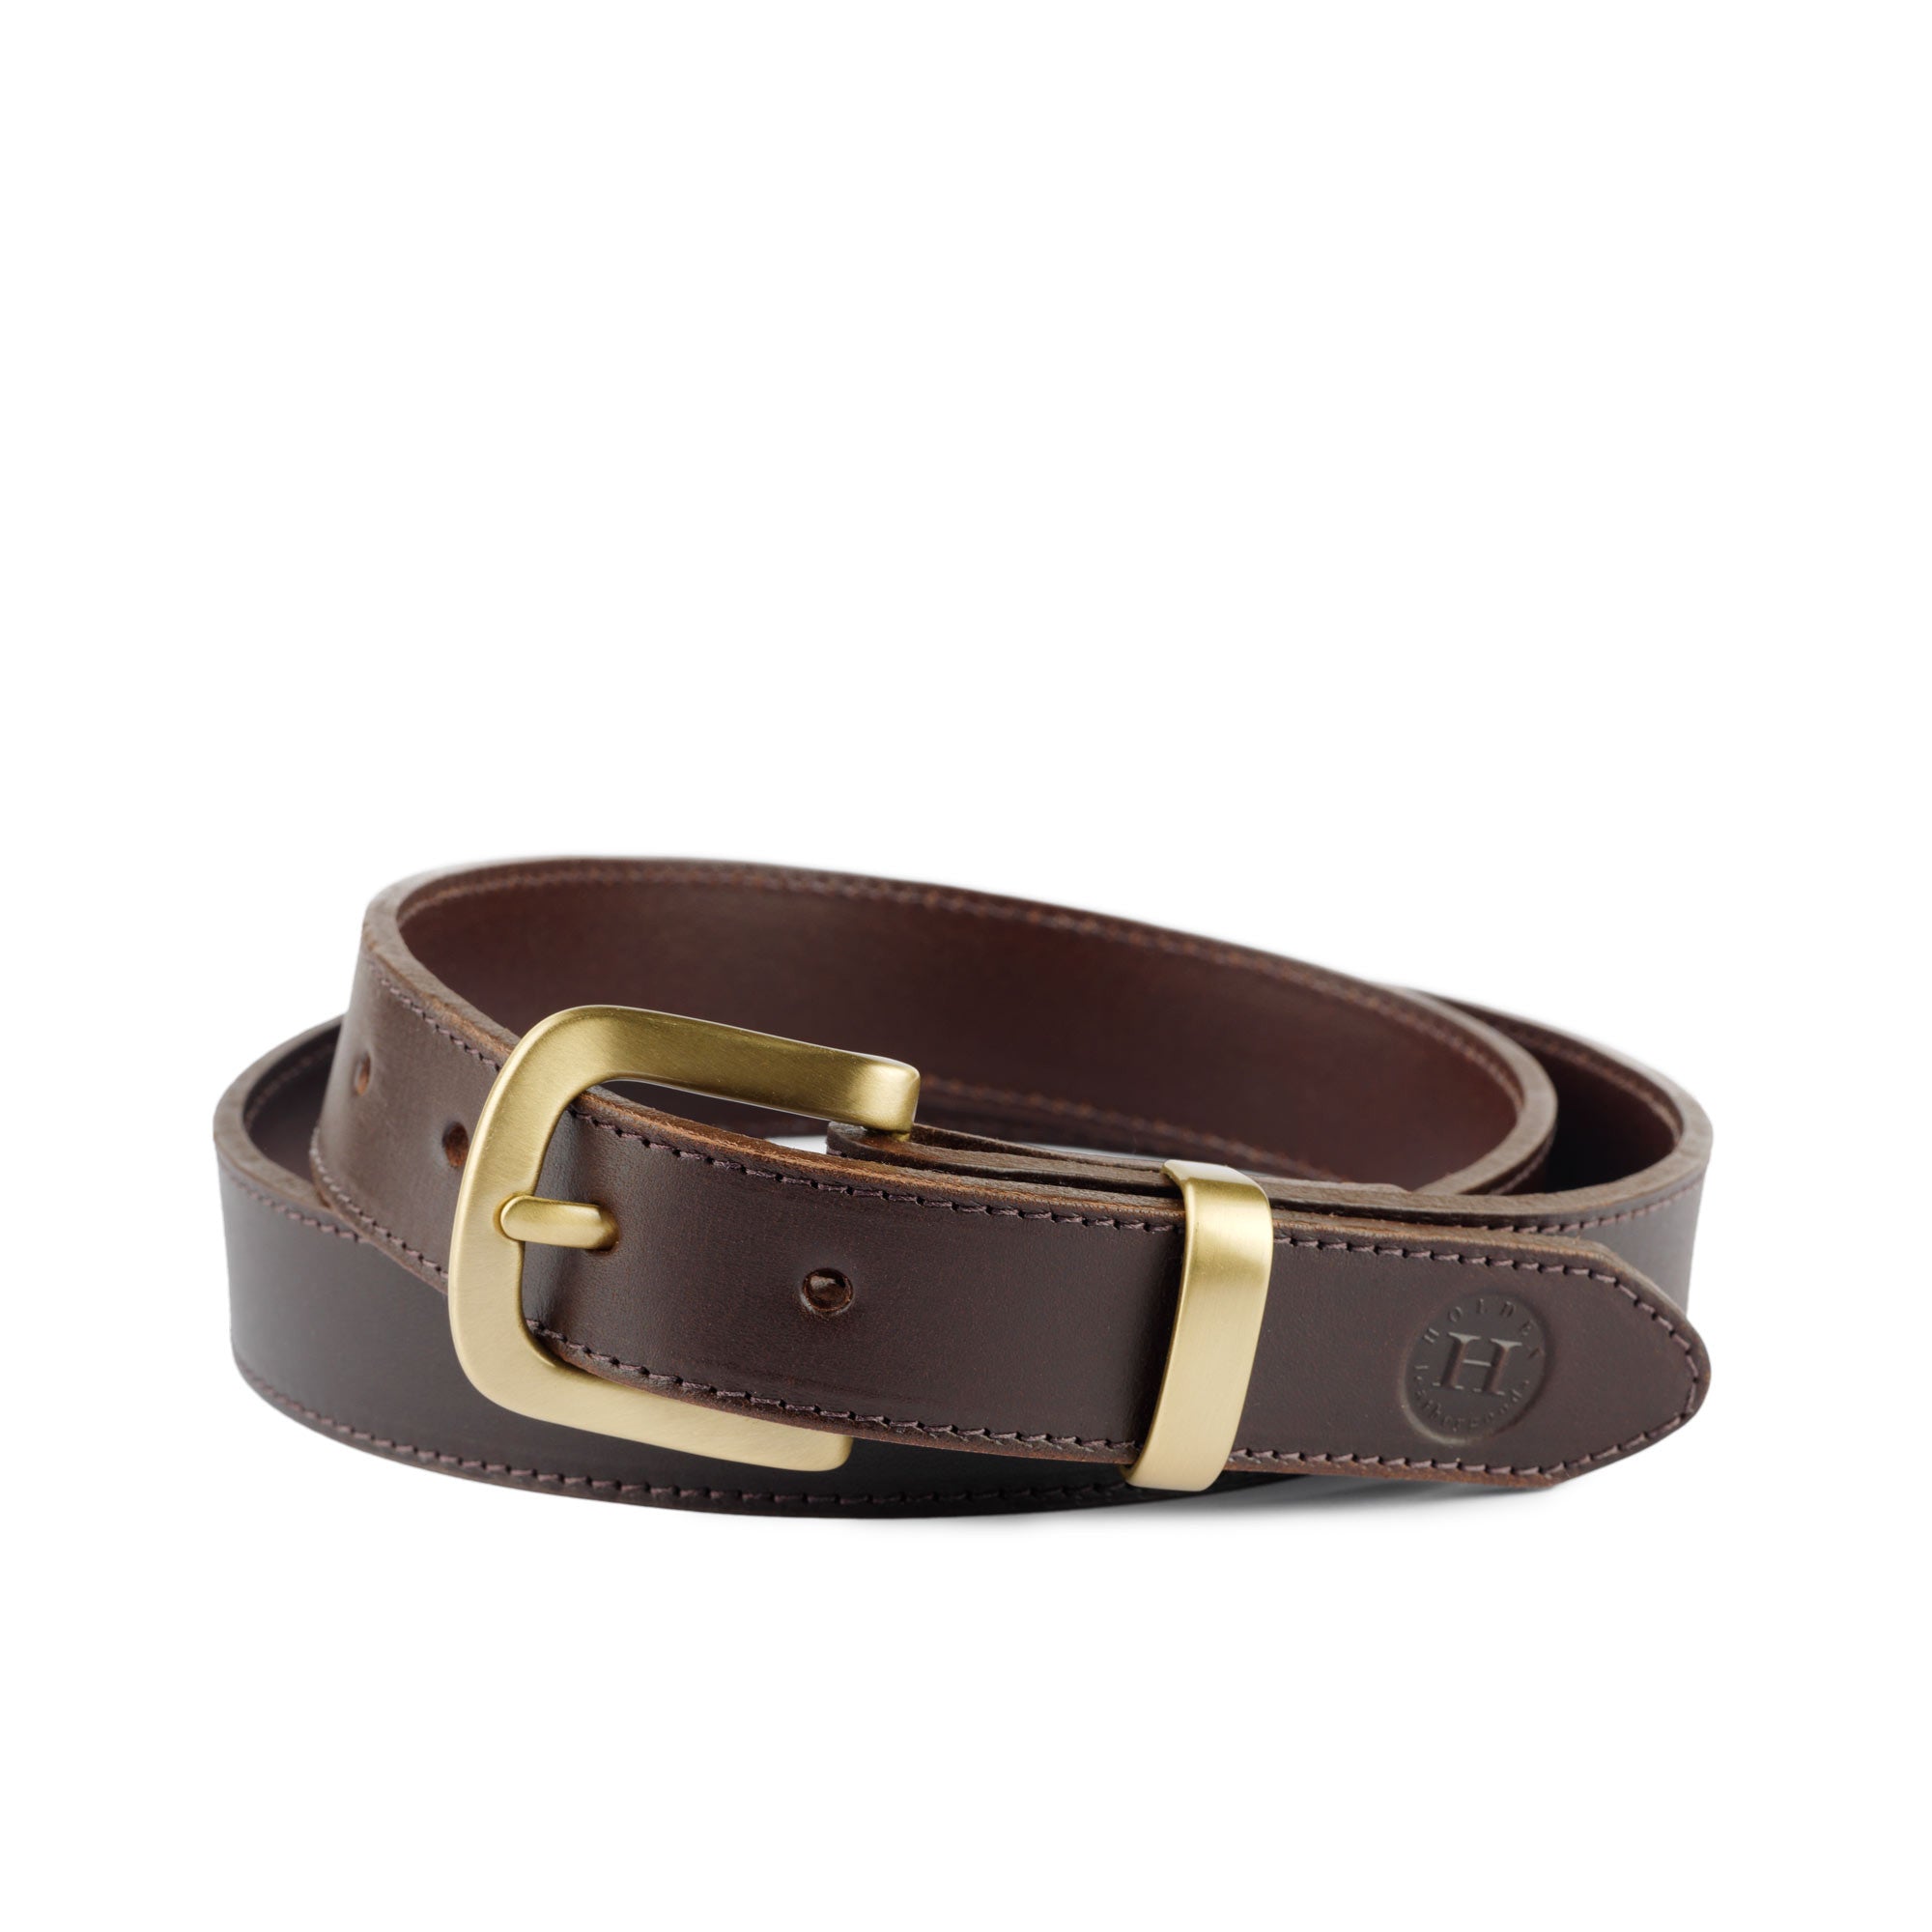 Holden Casual Leather Belt CB1 Brown - Holden Leathergoods, leather bags handmade in Ireland